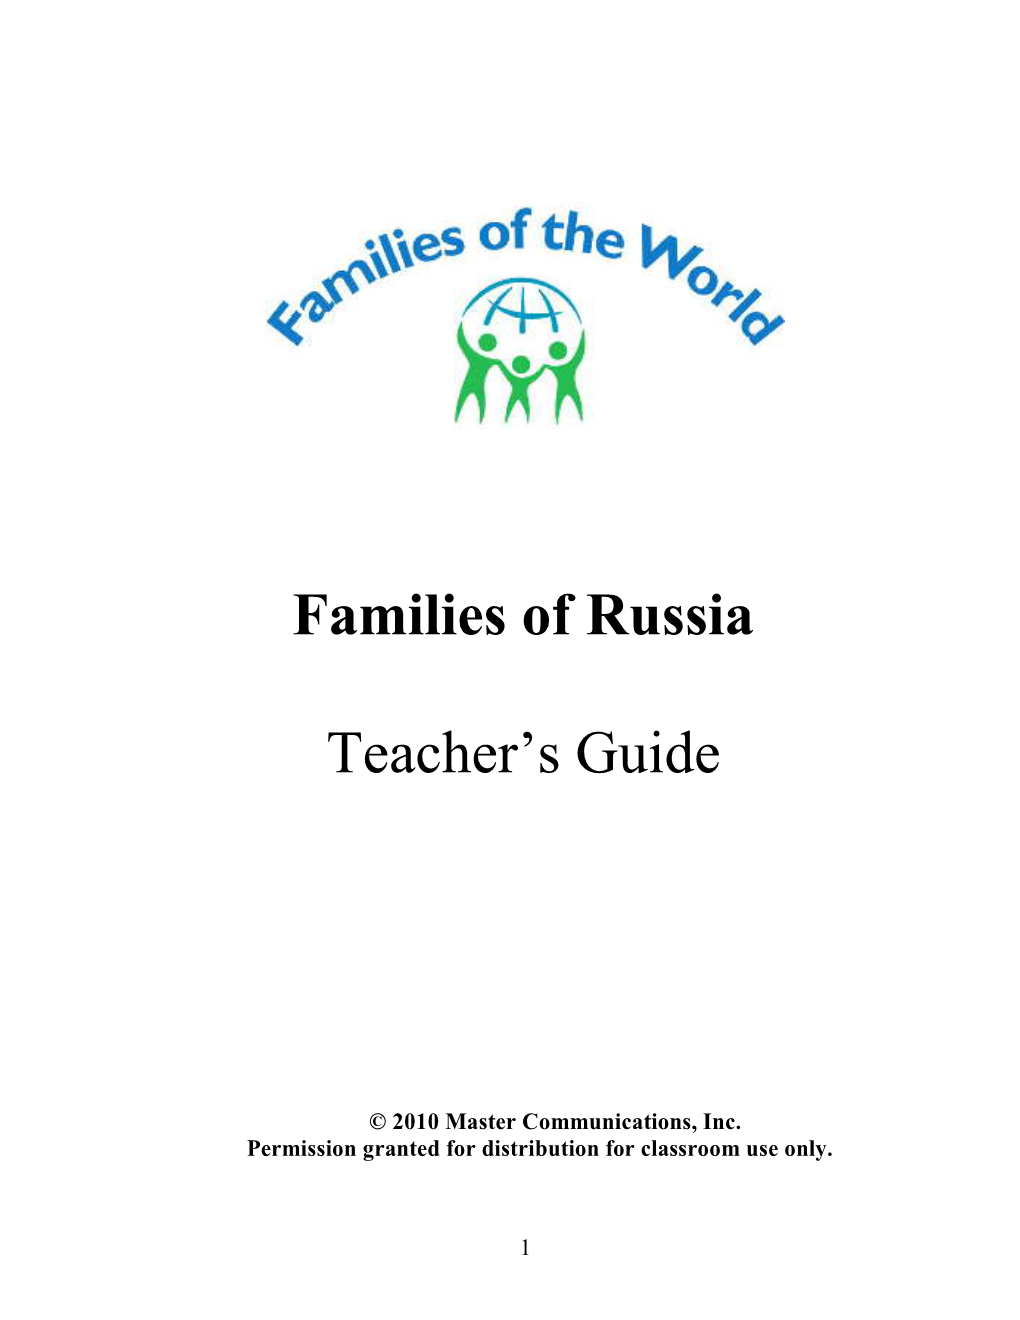 Families of Russia Teacher's Guide